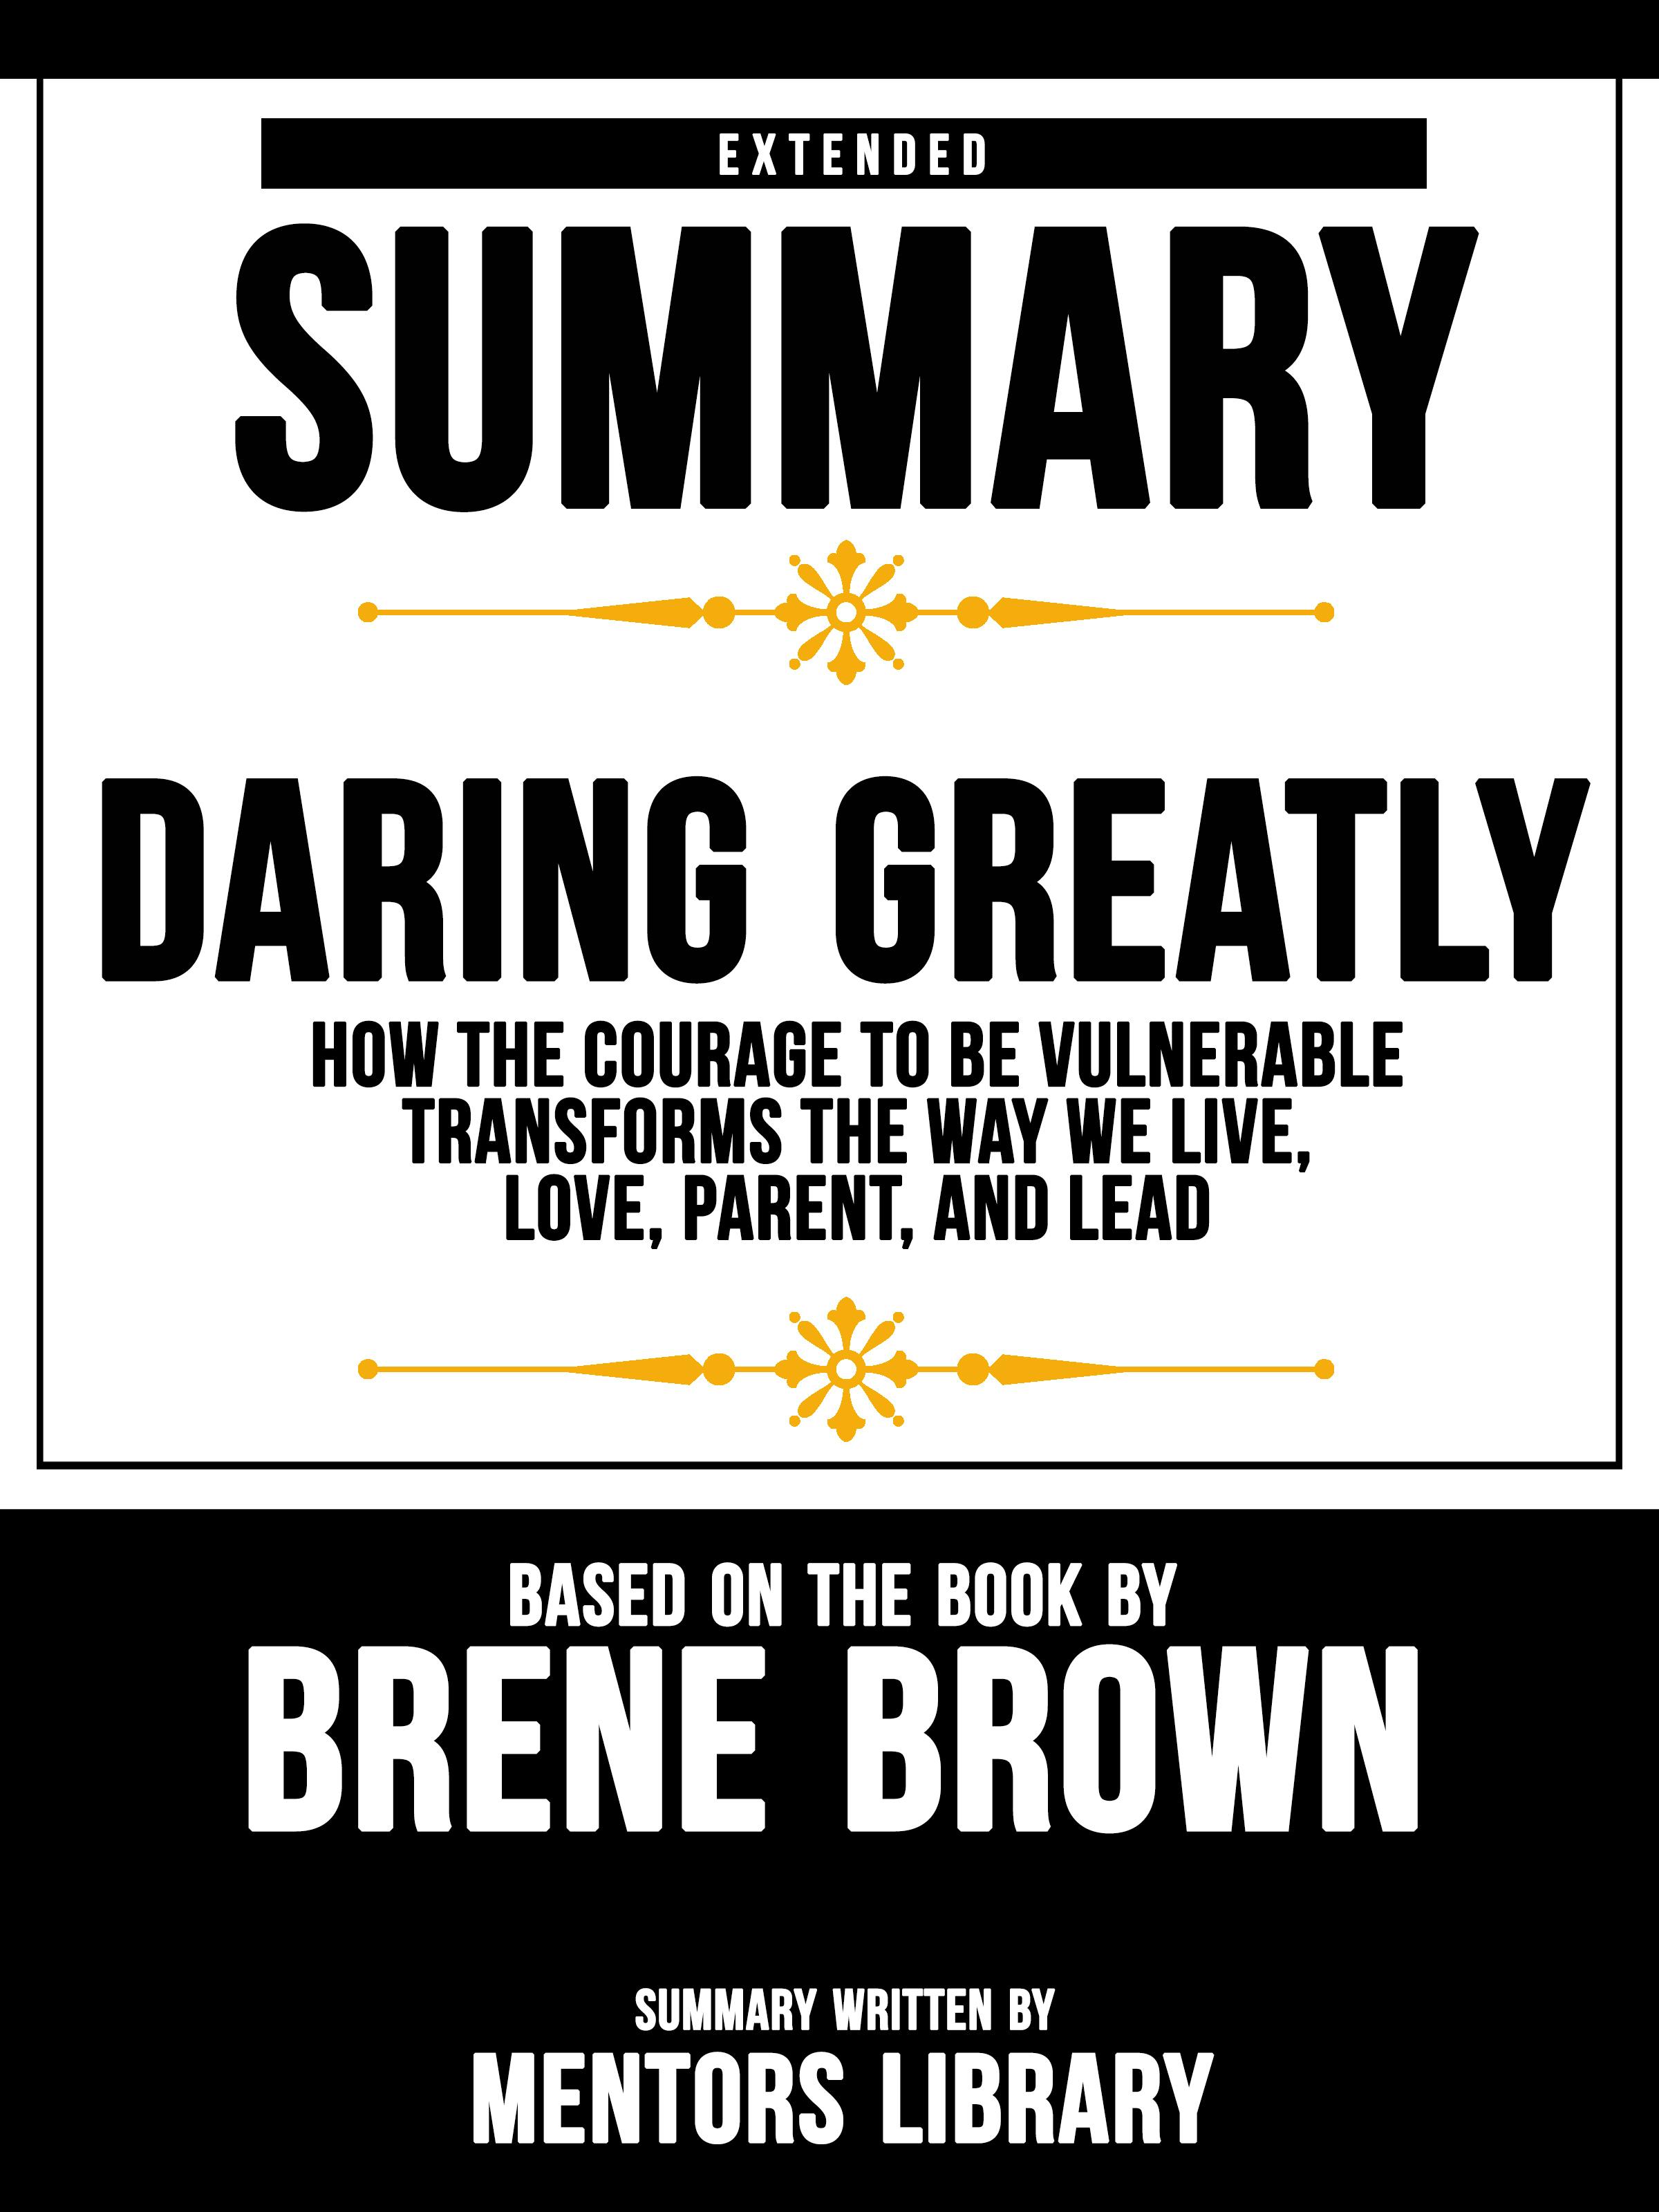 Extended Summary Of Daring Greatly: How The Courage To Be Vulnerable Transforms The Way We Live, Love, Parent, And Lead - Based On The Book By Brene Brown - undefined